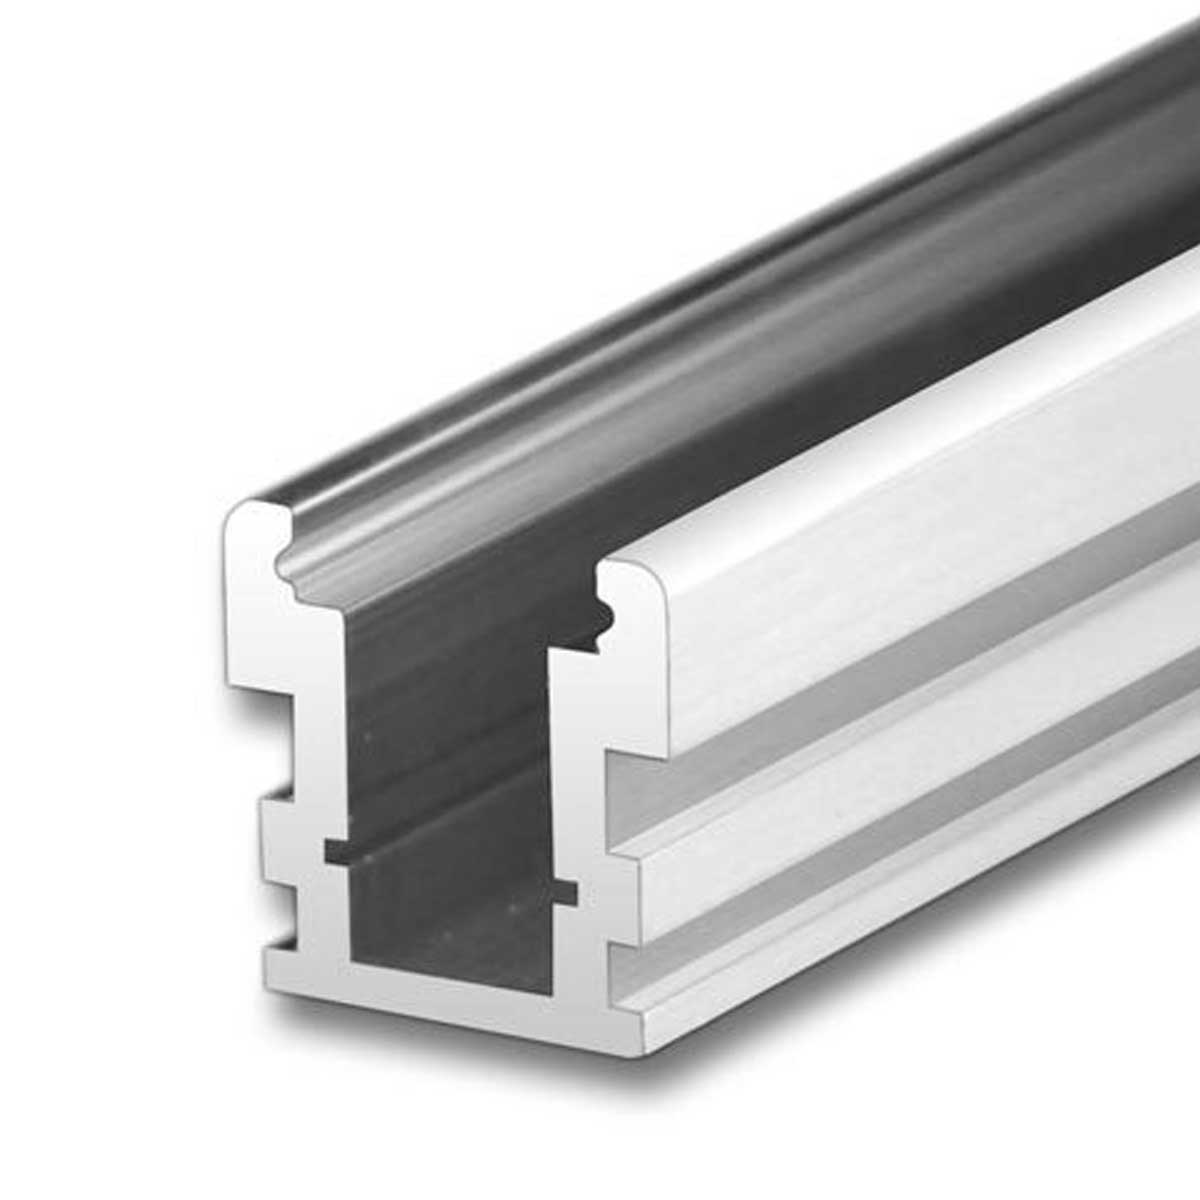 1000 Aluminium Slotted Channel Manufacturers, Suppliers in Gandhidham